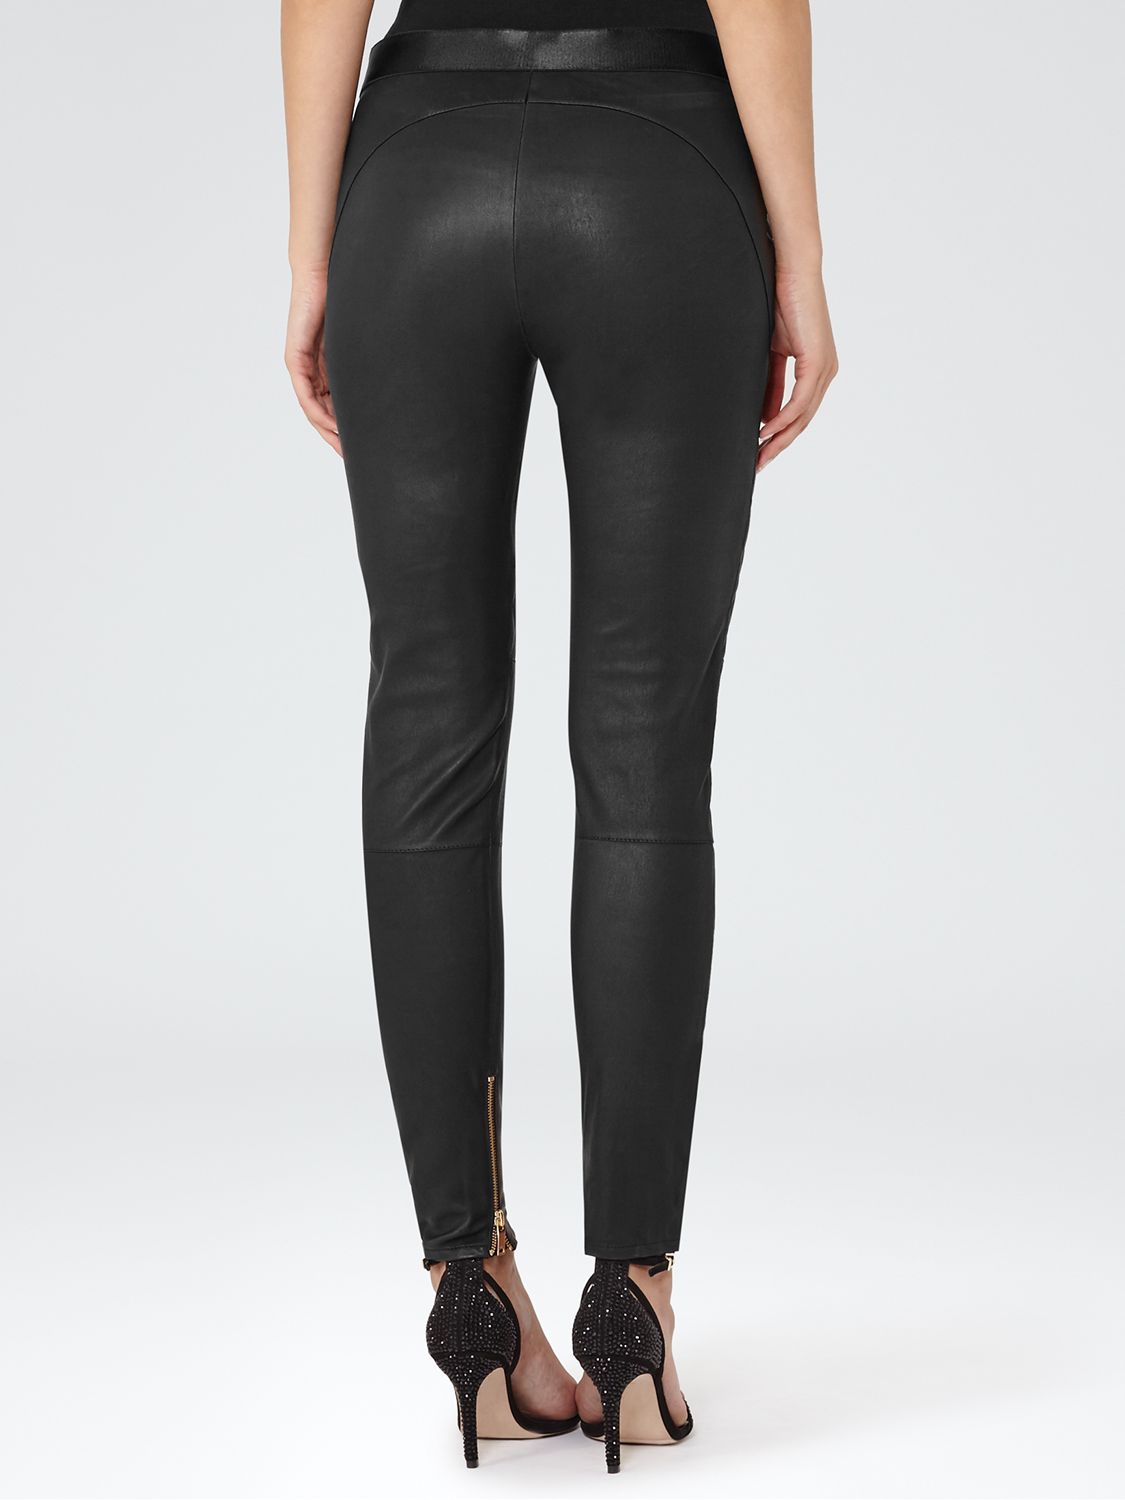 Reiss Drift Leather Trousers, Black at 